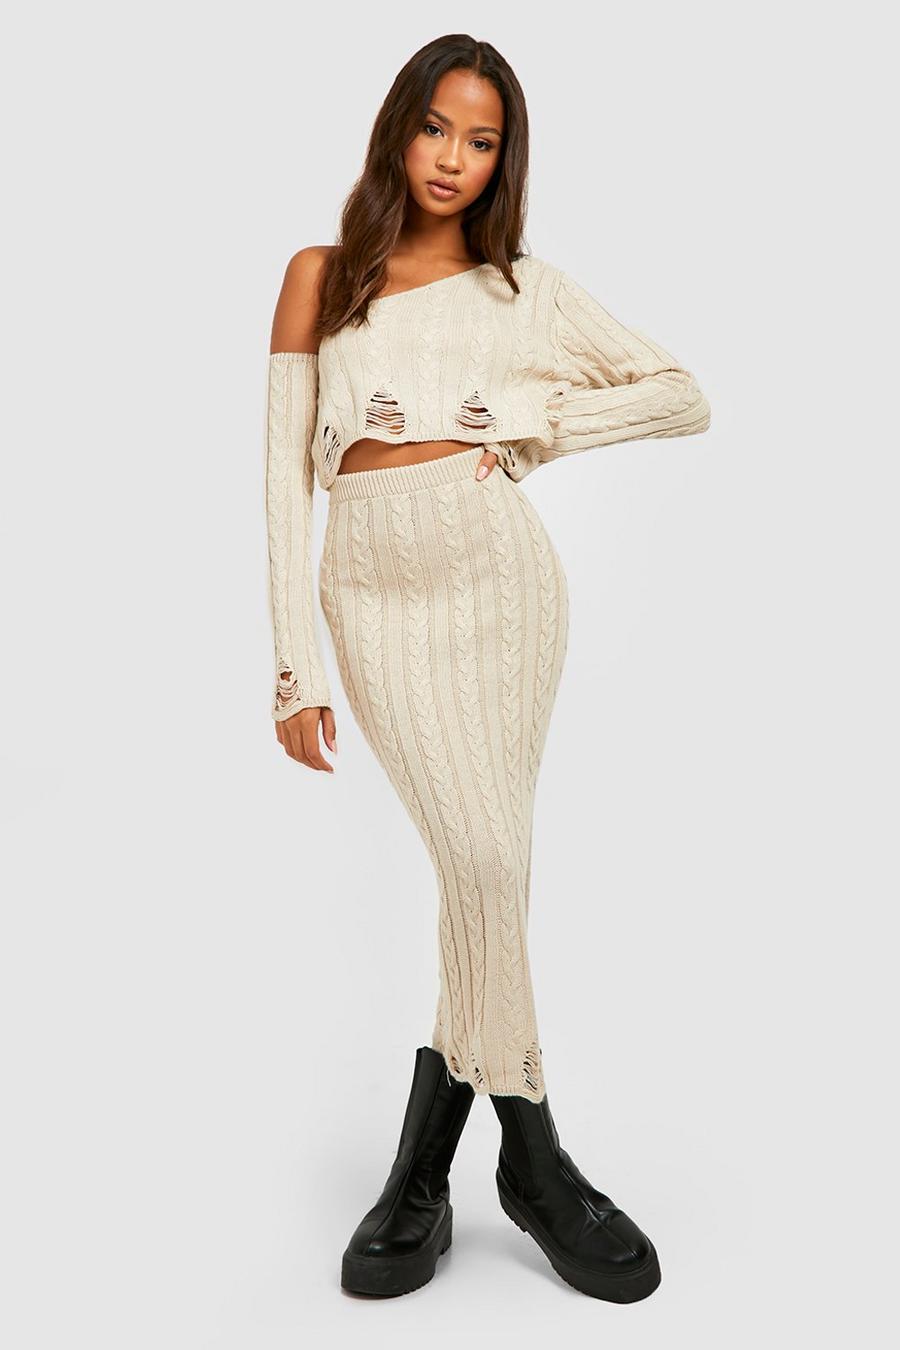 Cream white Distressed Hem Knitted Crop & Skirt Co-ord